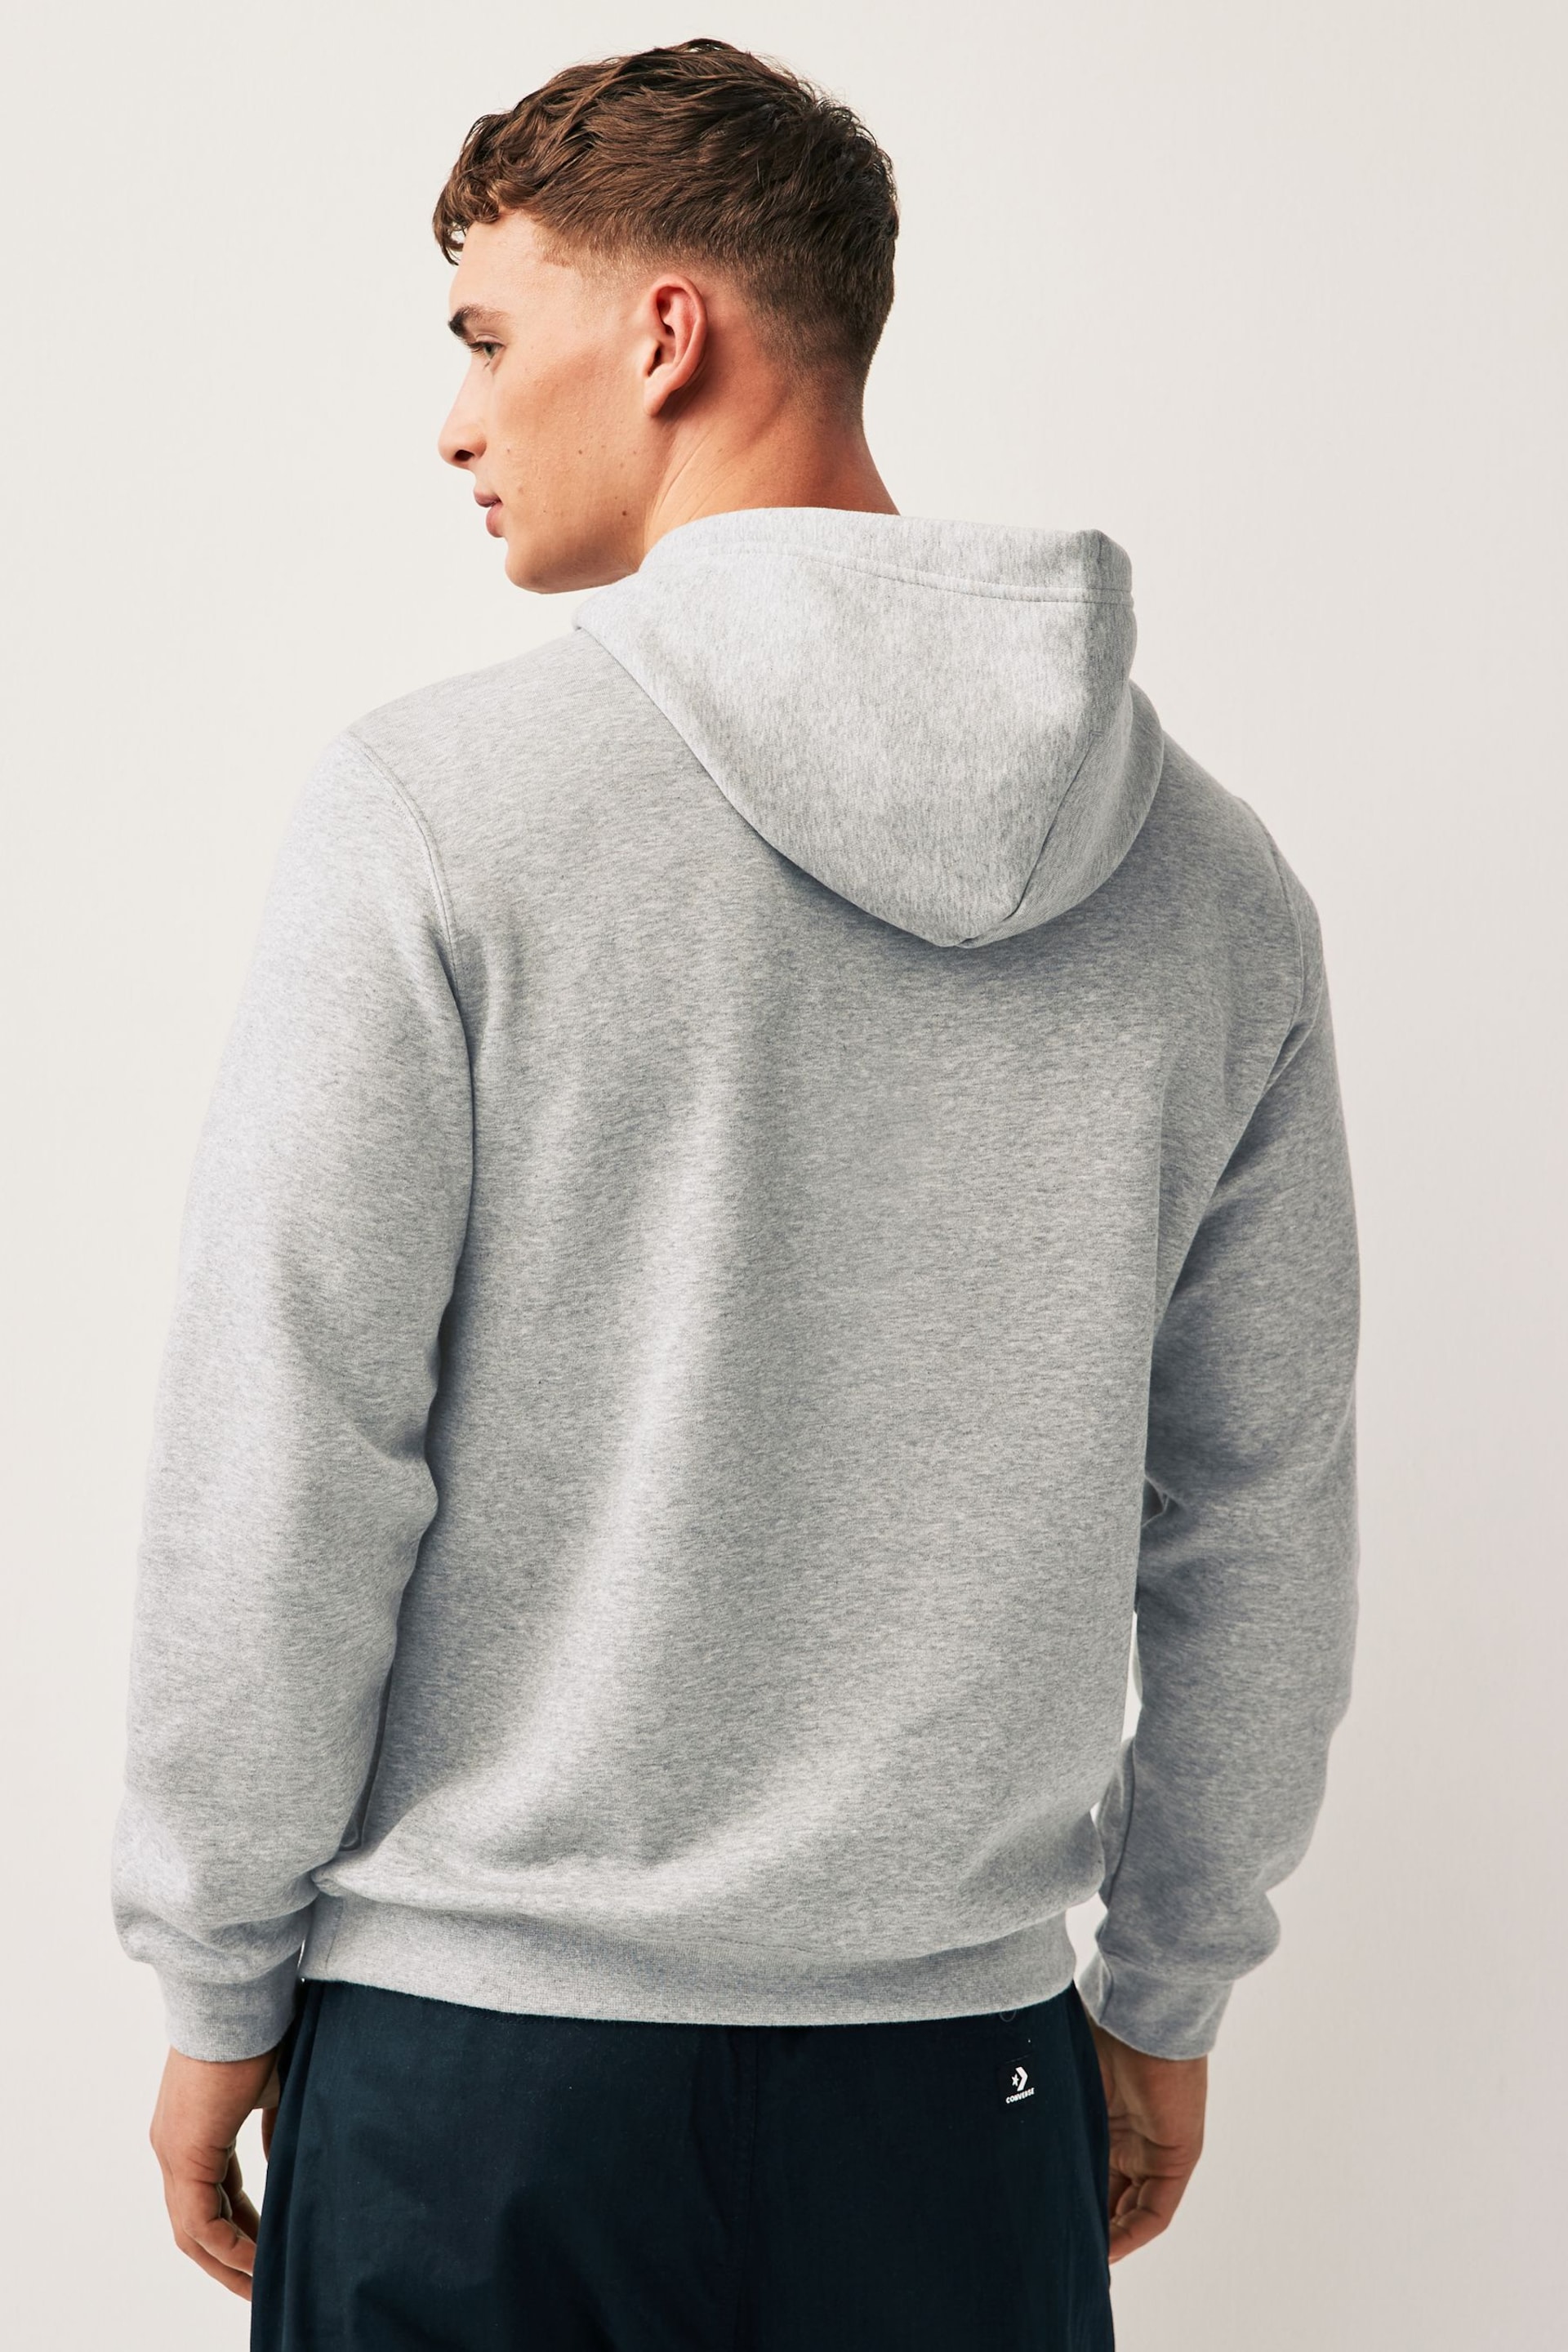 Converse Grey Chuck Patch Hoodie - Image 3 of 4